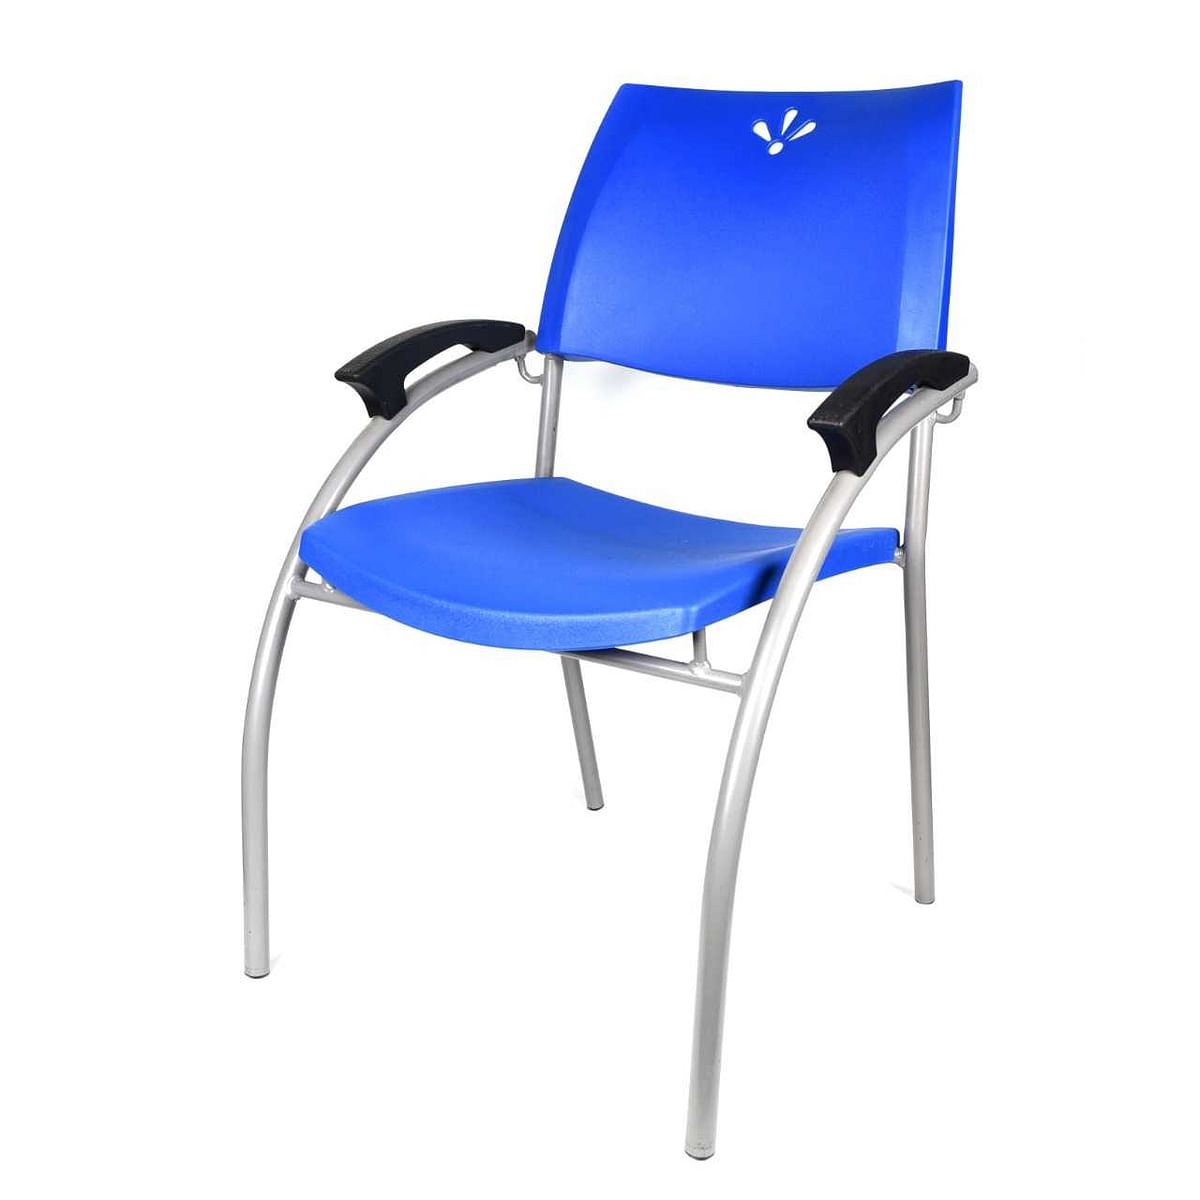 Plastic dining chair with metal frame and arm rest - blue